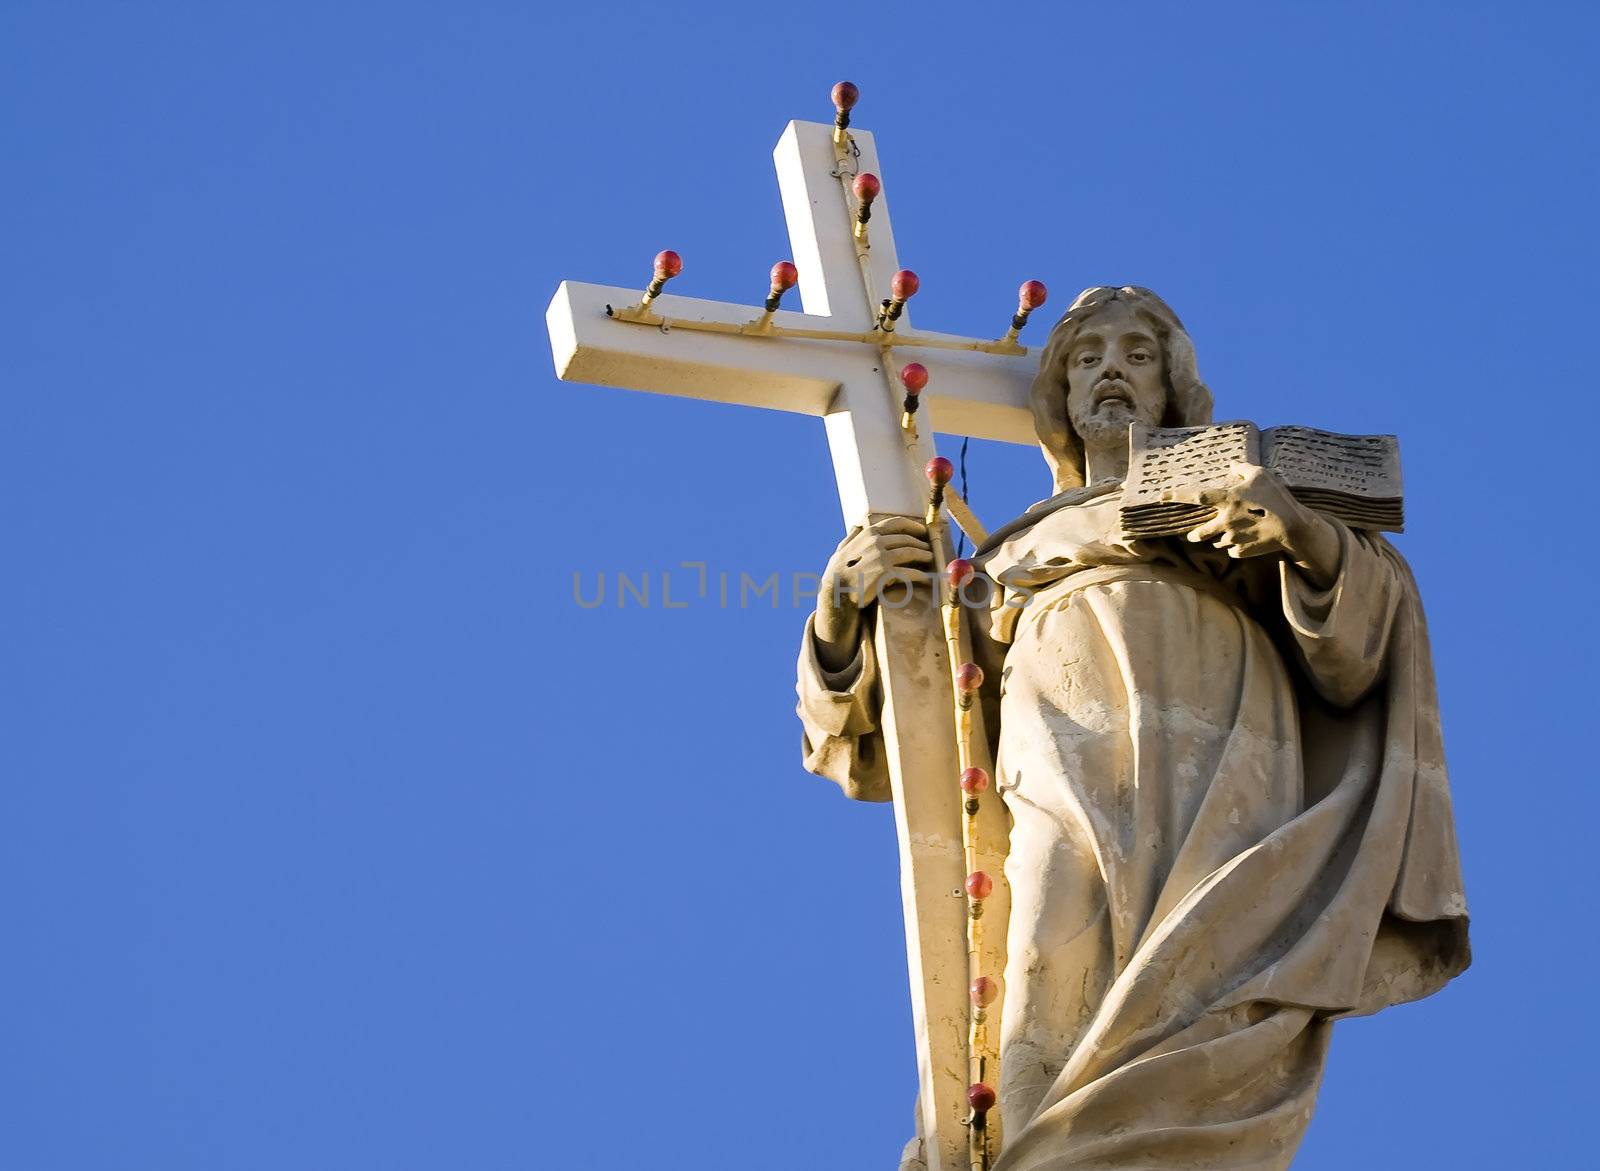 Medieval statue of Jesus Christ which can be found on top of the Parish Church in Luqa Malta